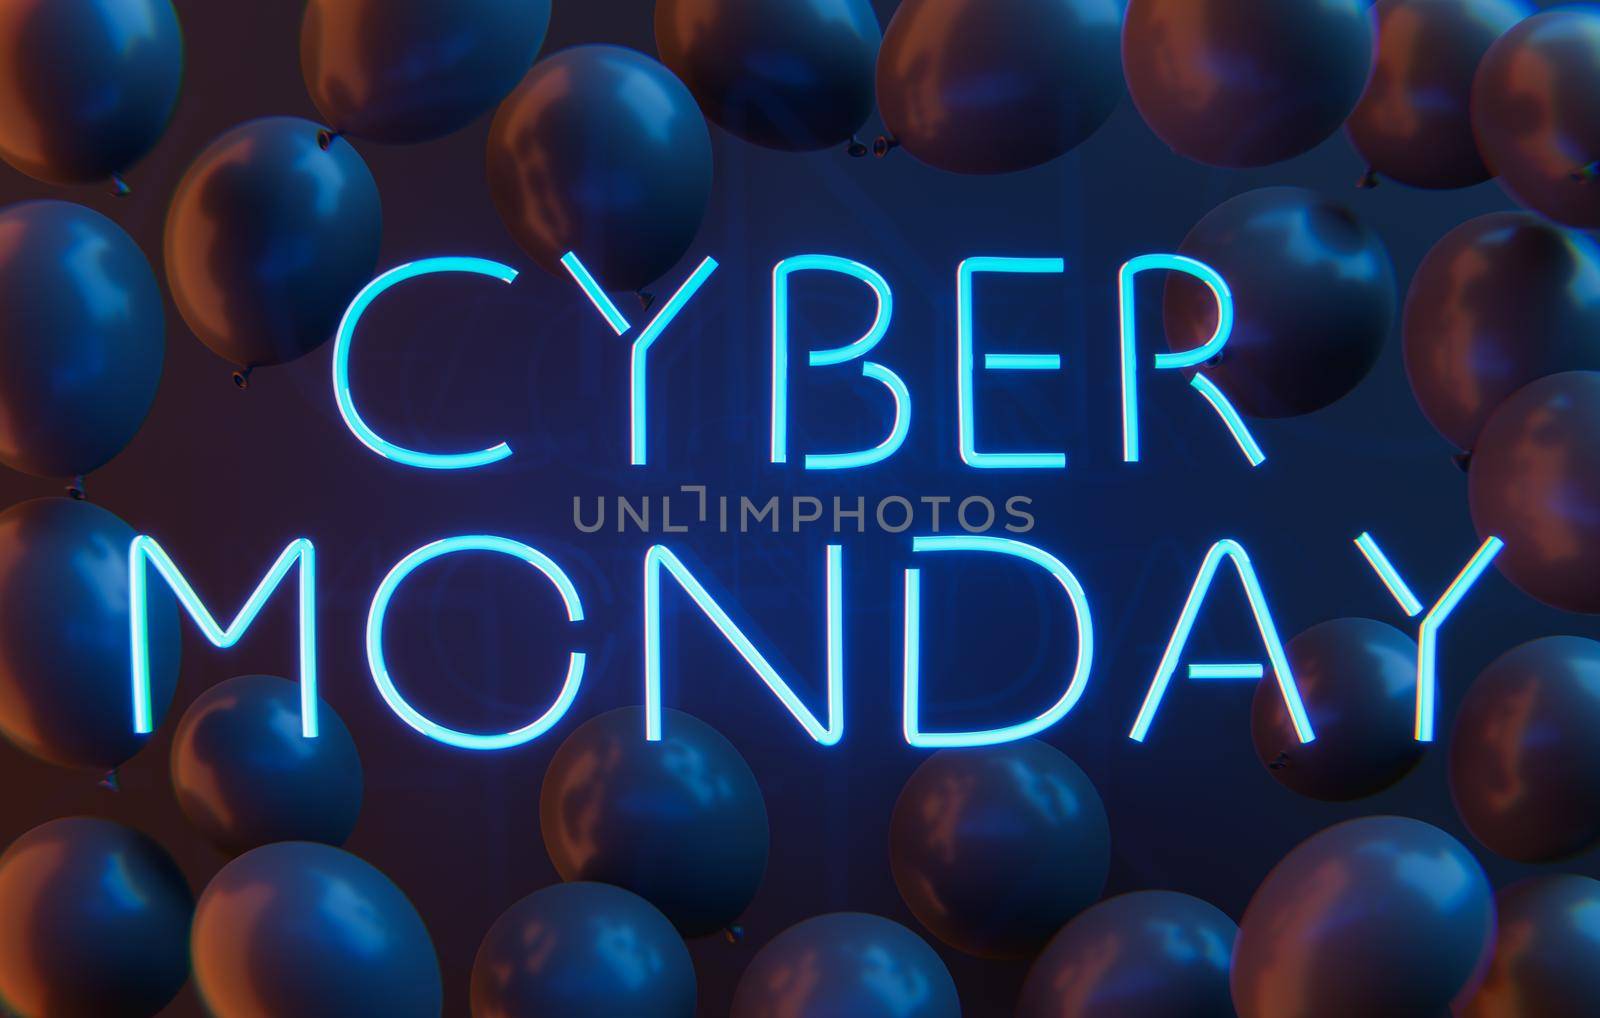 CYBER MONDAY neon sign with balloons by asolano